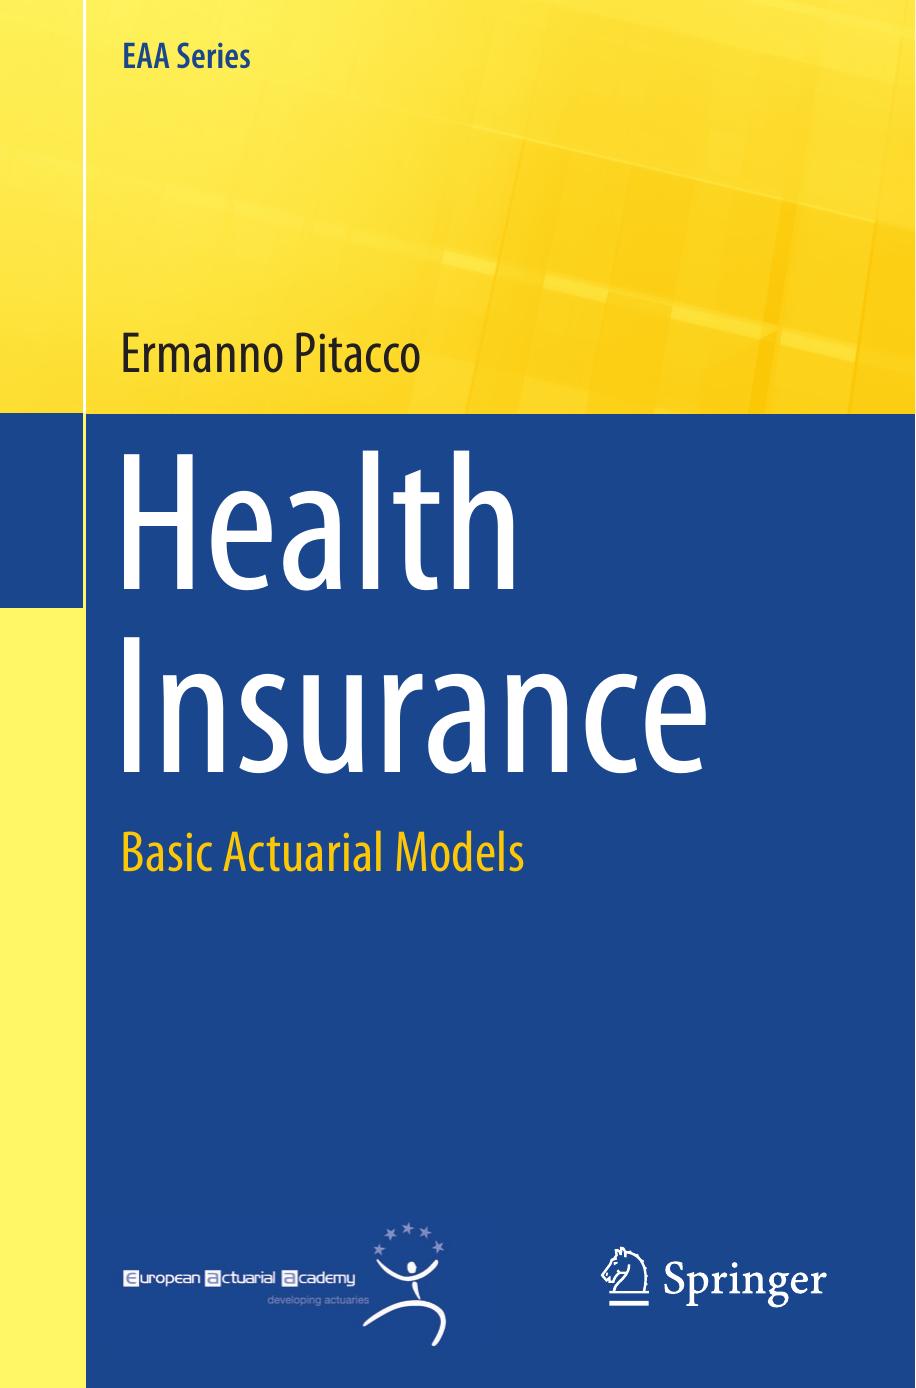 Health Insurance Basic Actuarial Models by Ermanno Pitacco (auth.) (z-lib.org)